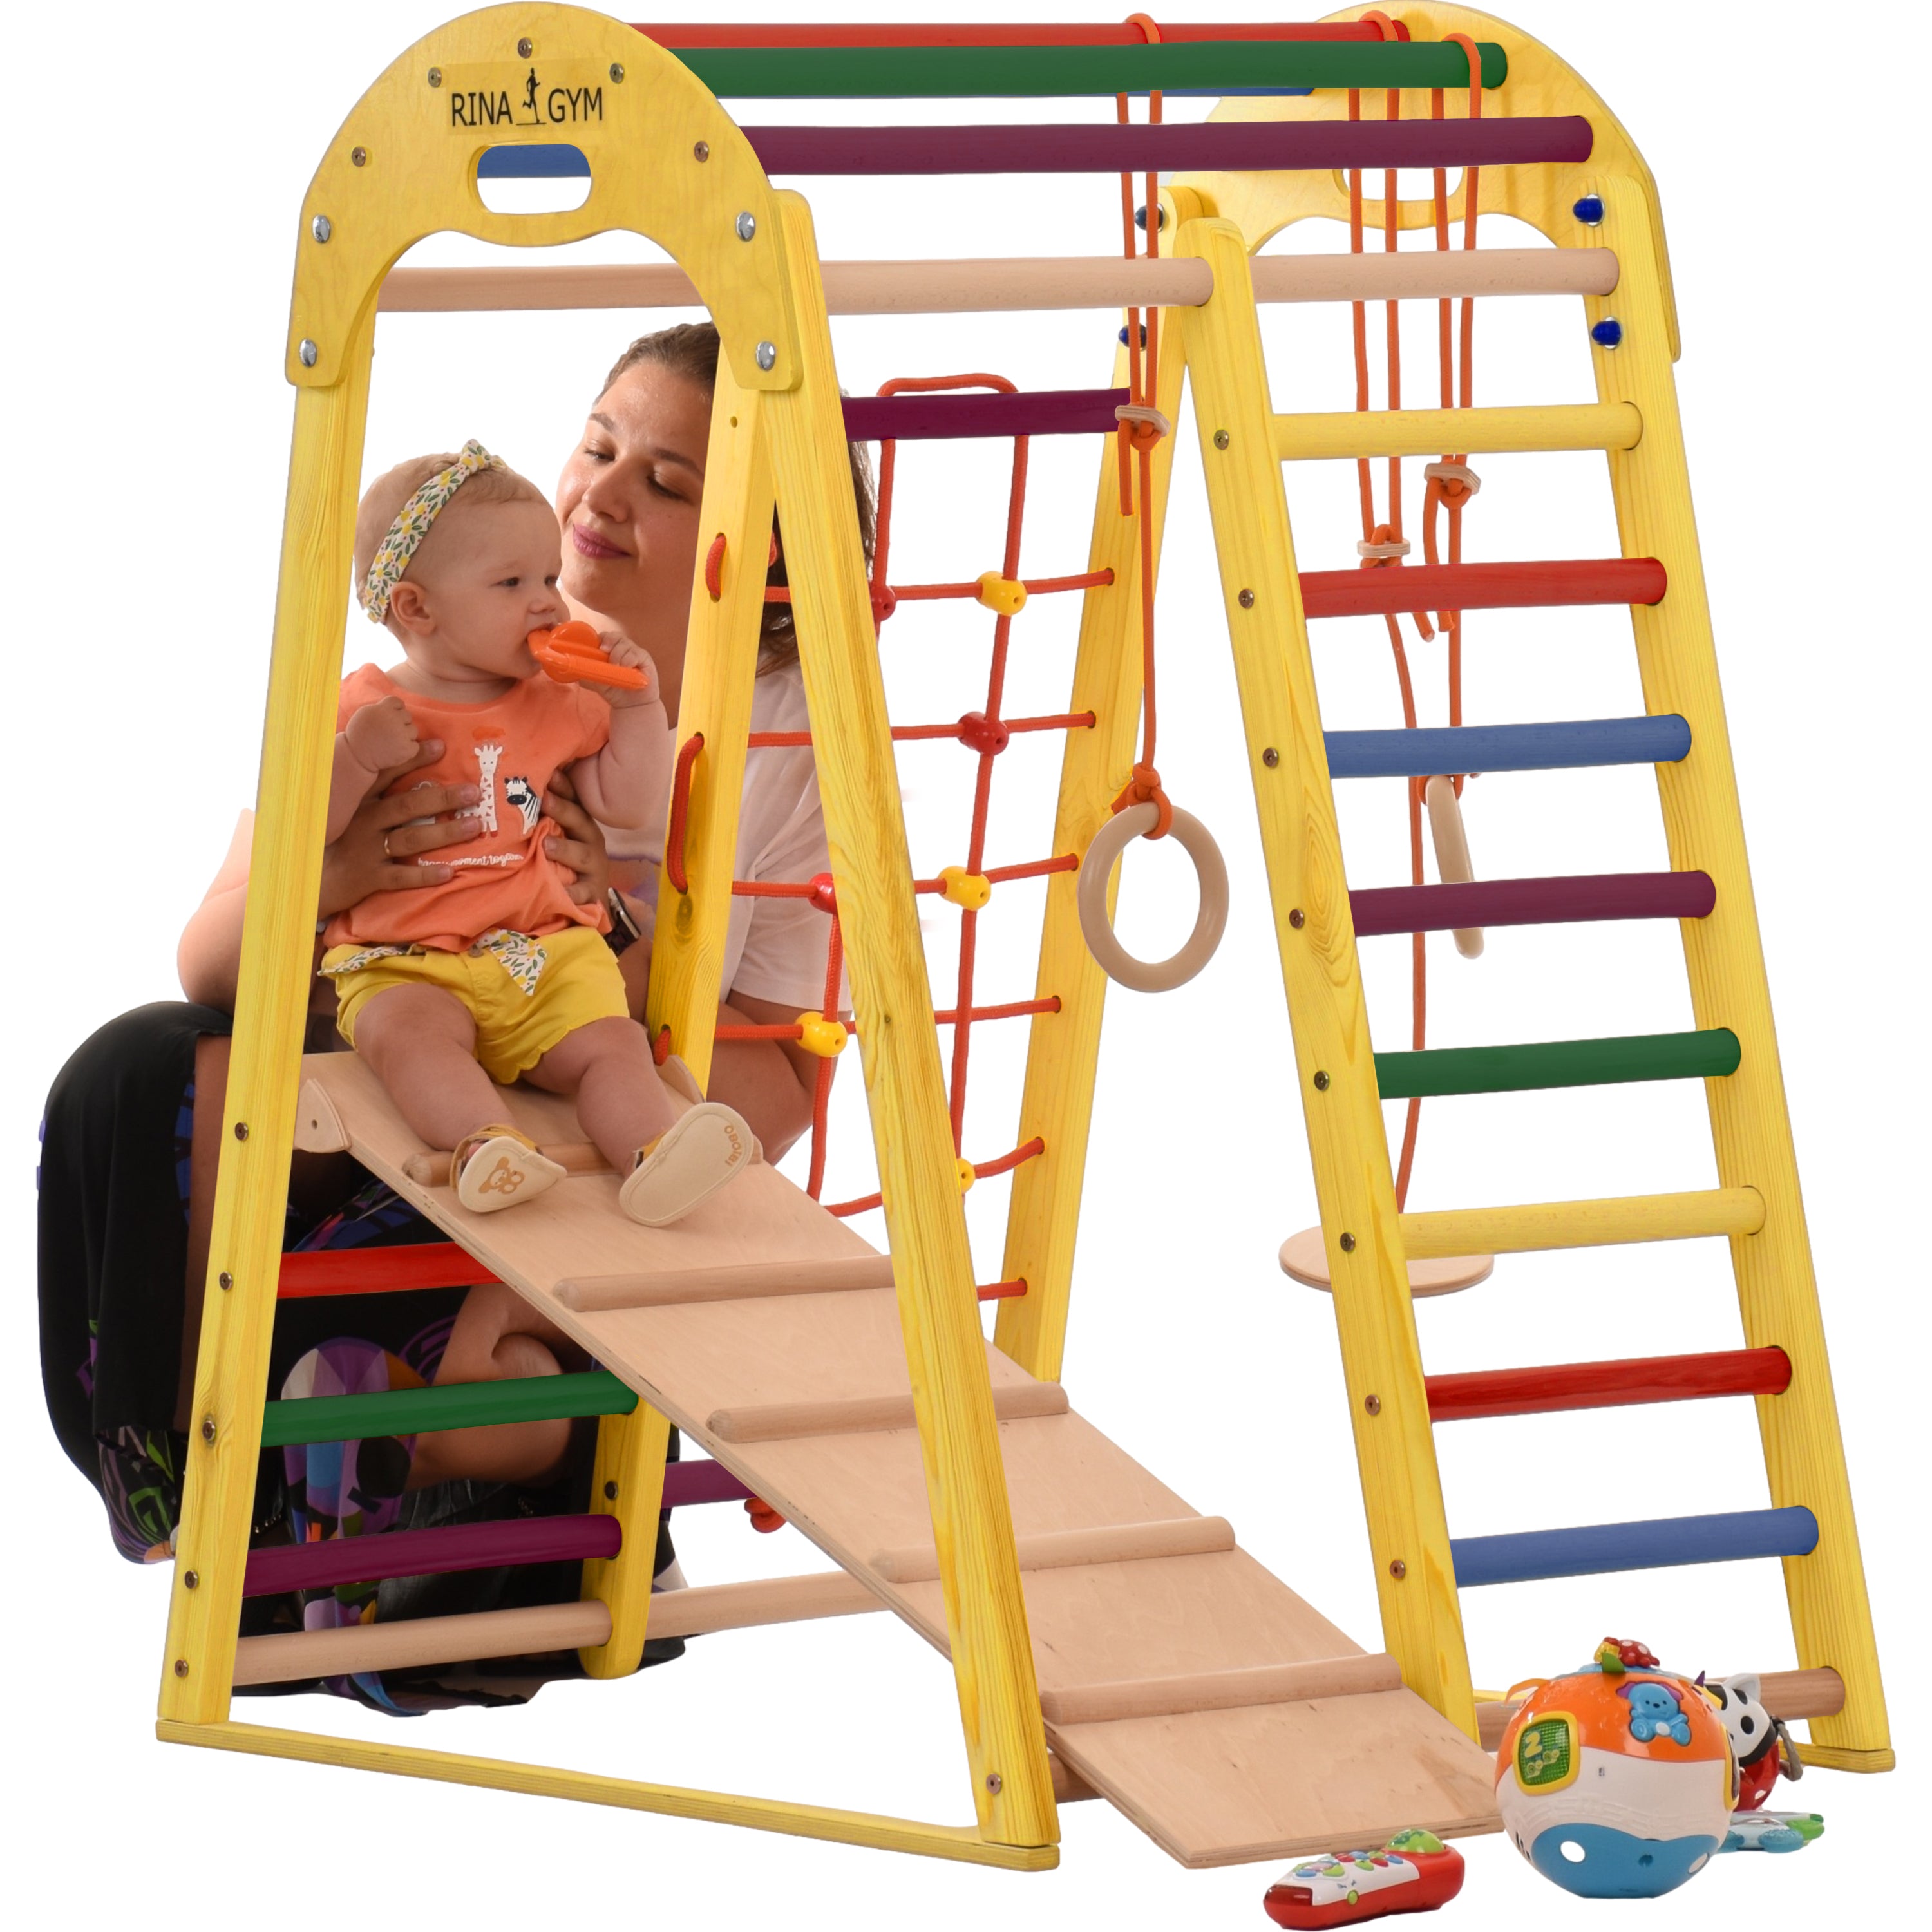 RINAGYM Play Gym - Home and School Indoor Wooden Playground Equipment for 1  to 5-Year Old